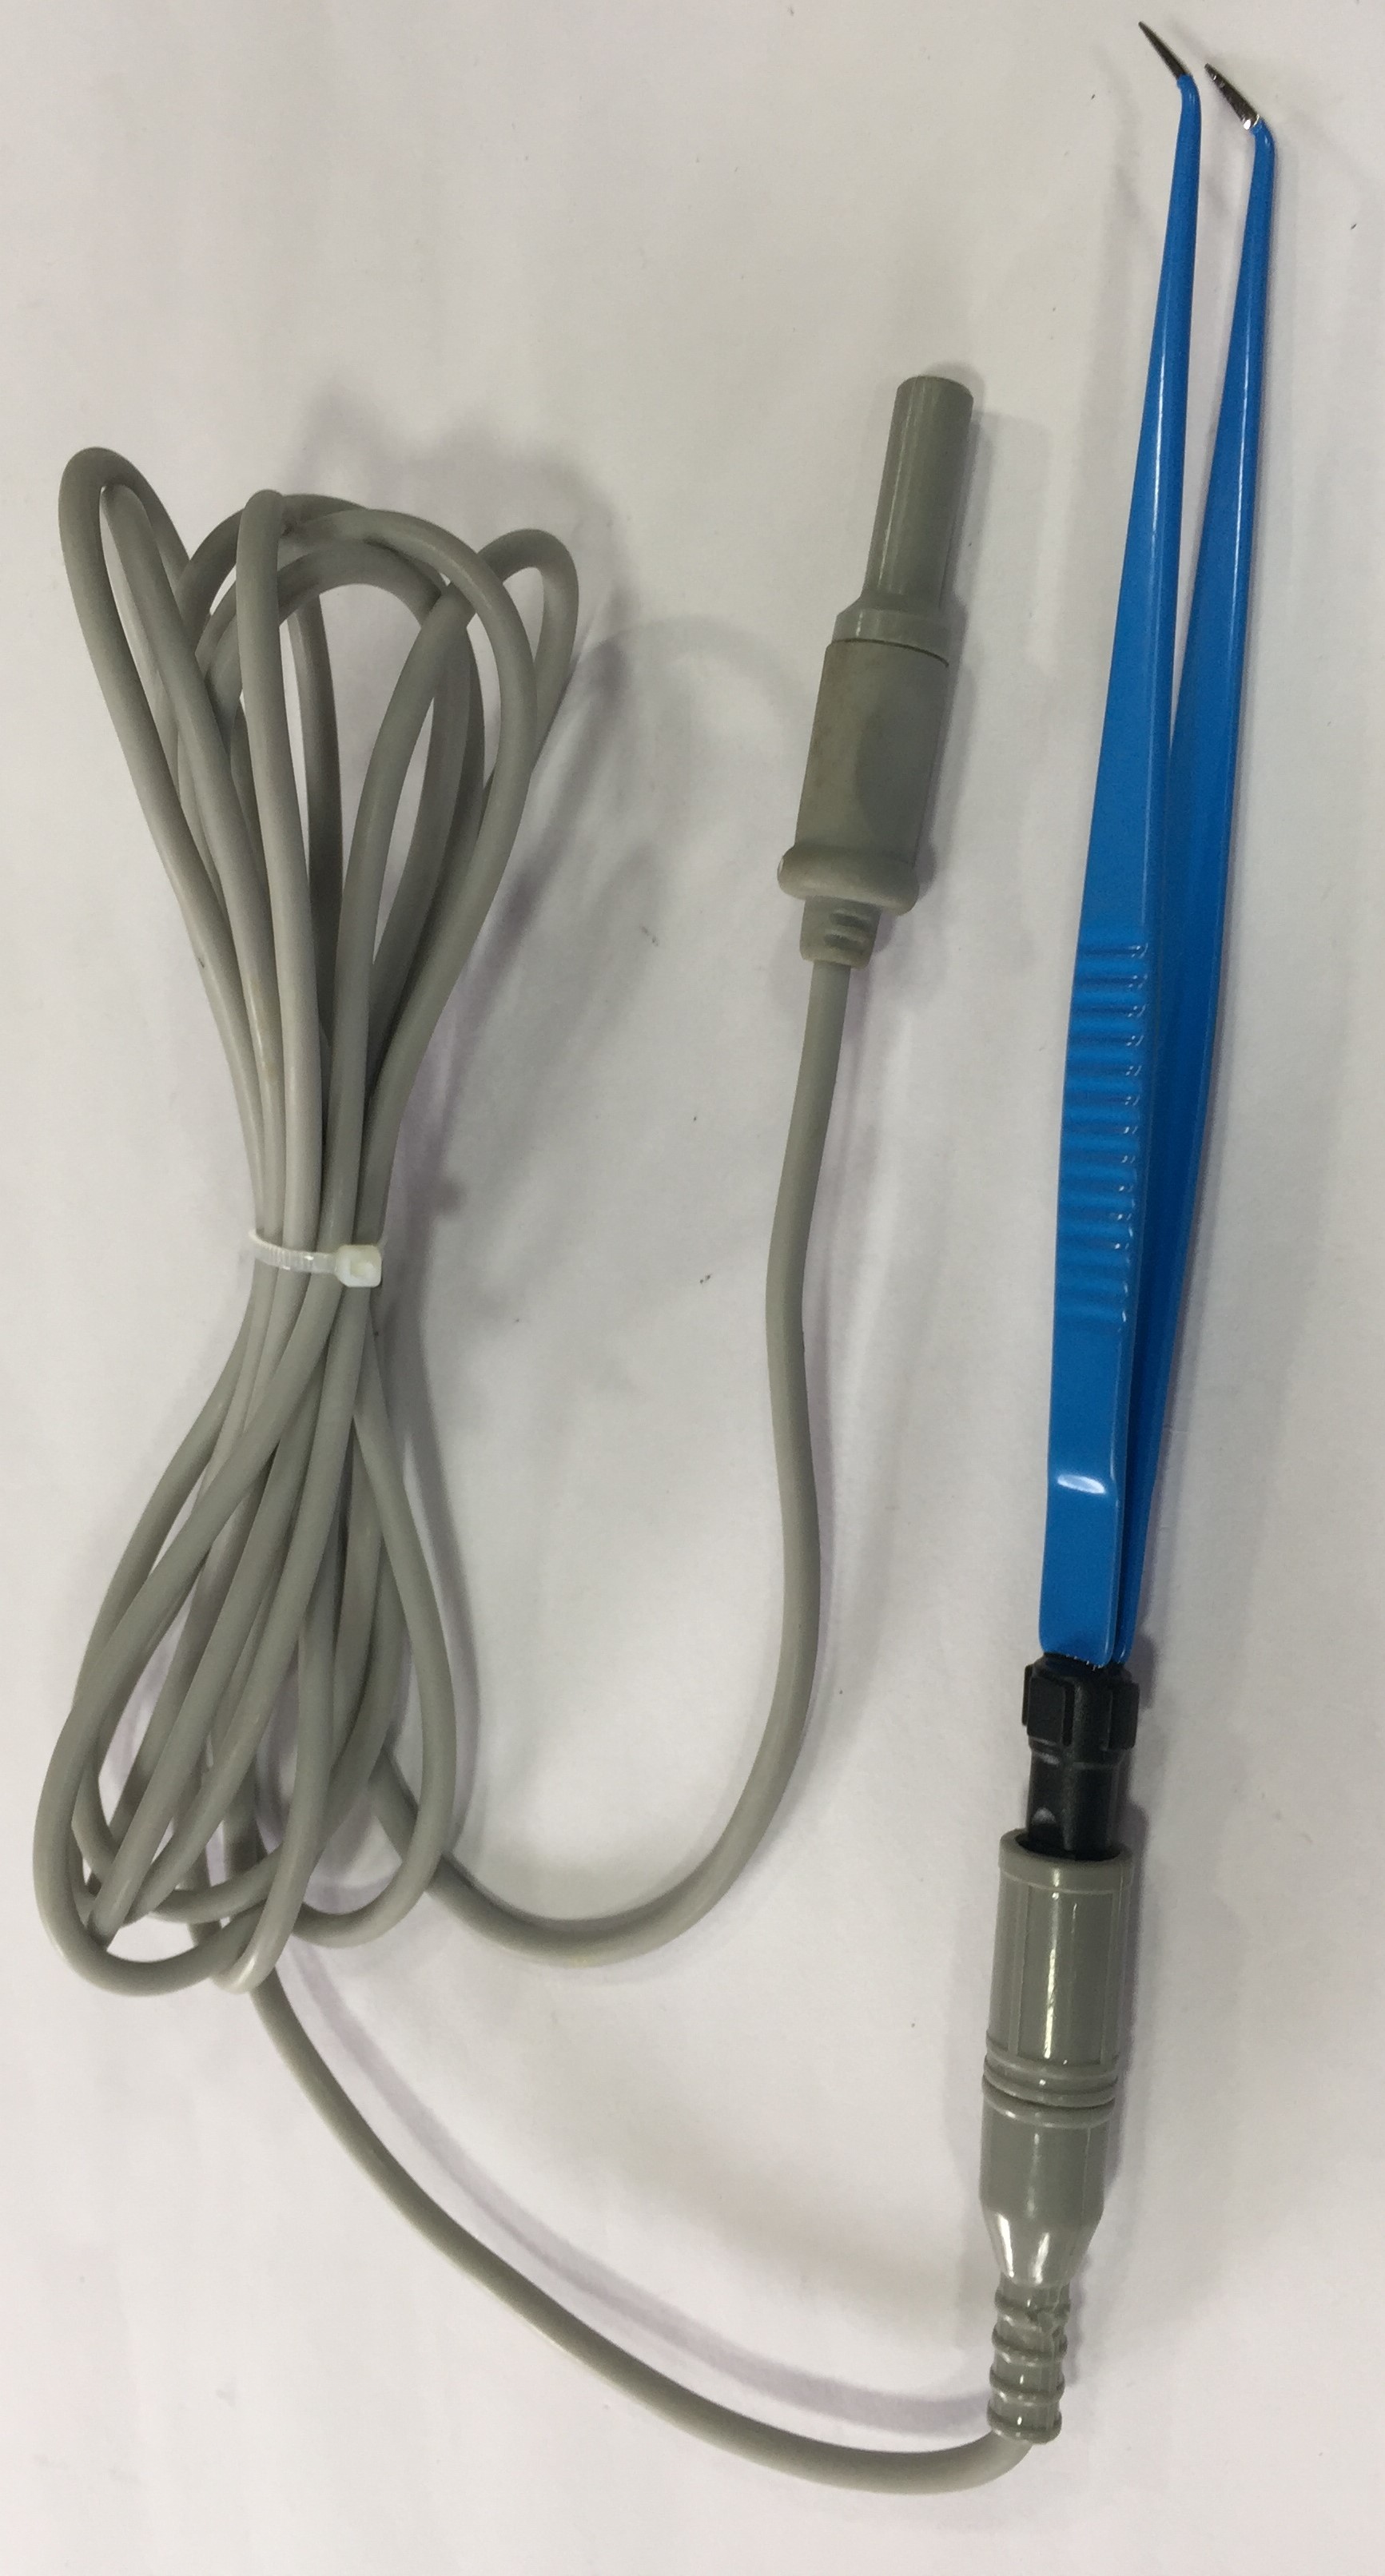 Martin Cable Bipolar Forceps Cable Cord